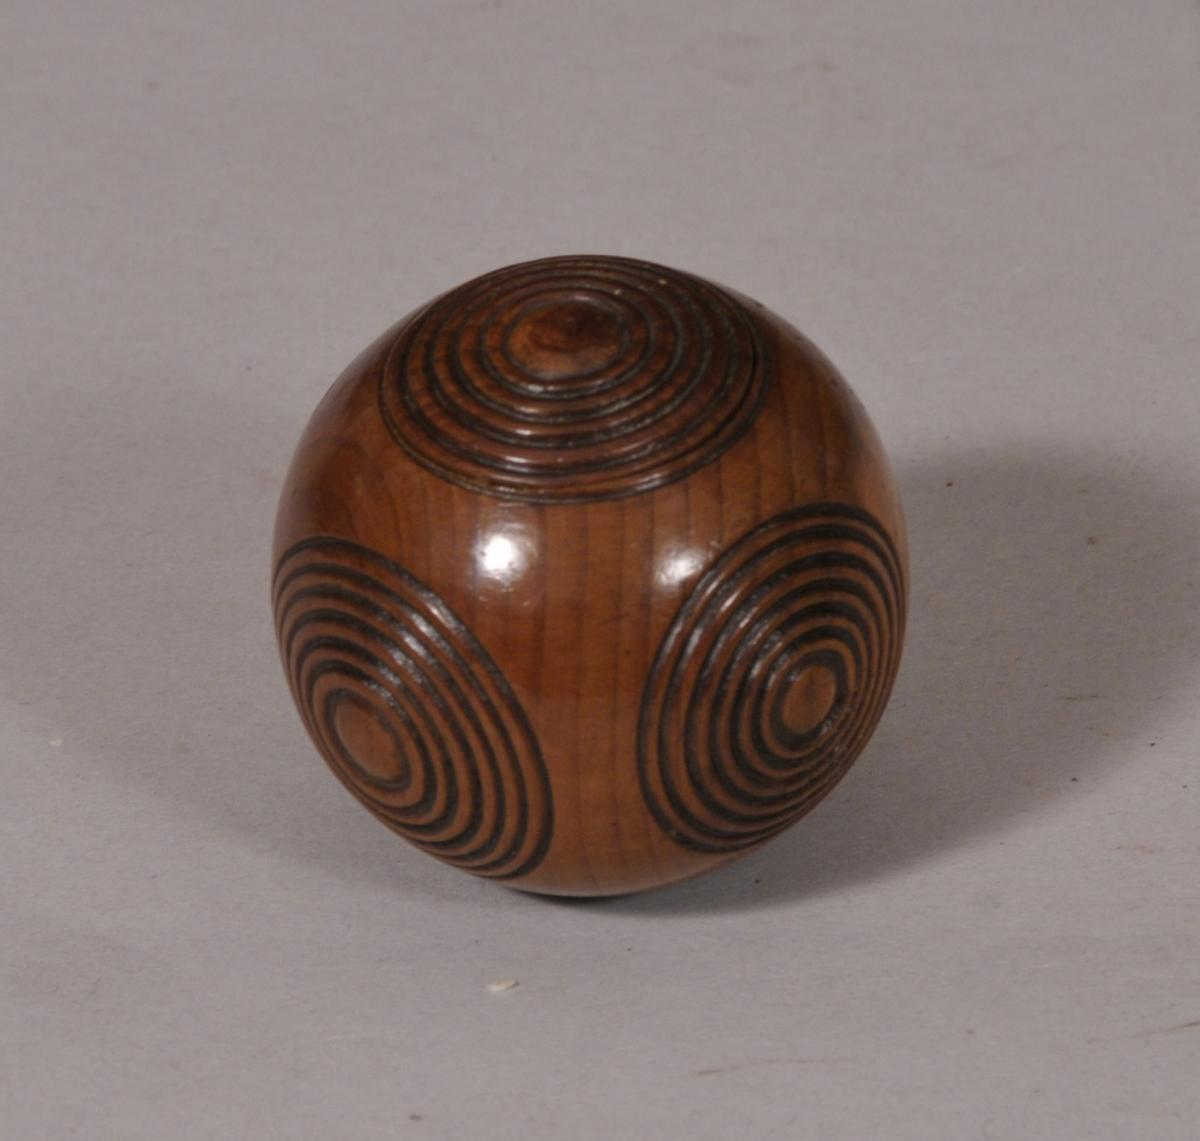 S/4643 Antique Treen 19th Century Yew Wood Puzzle Ball